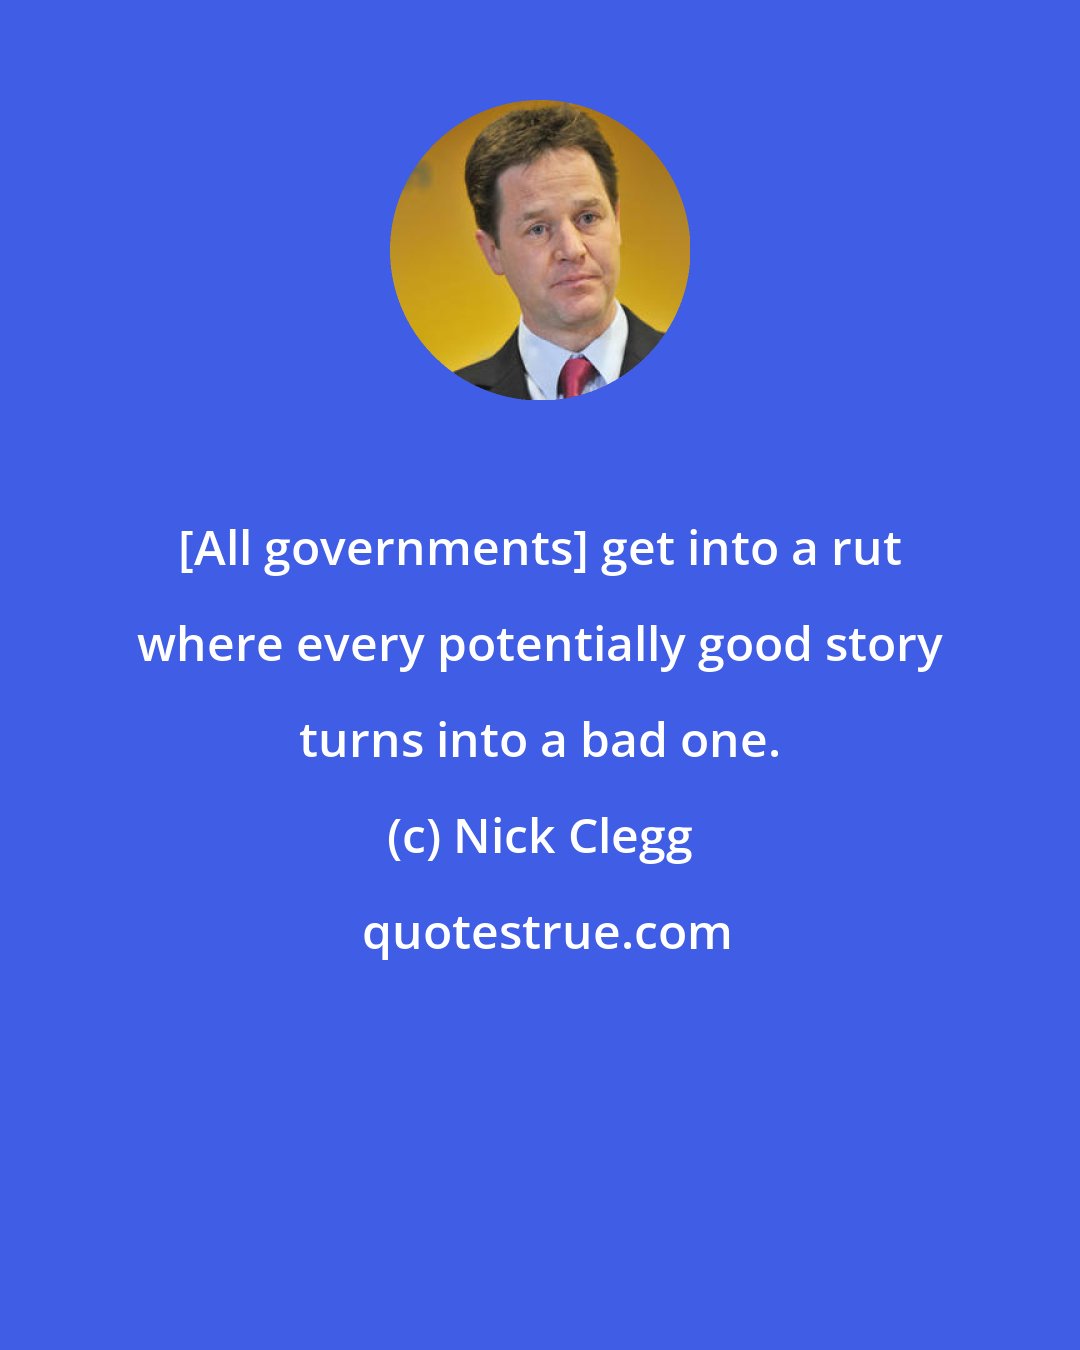 Nick Clegg: [All governments] get into a rut where every potentially good story turns into a bad one.